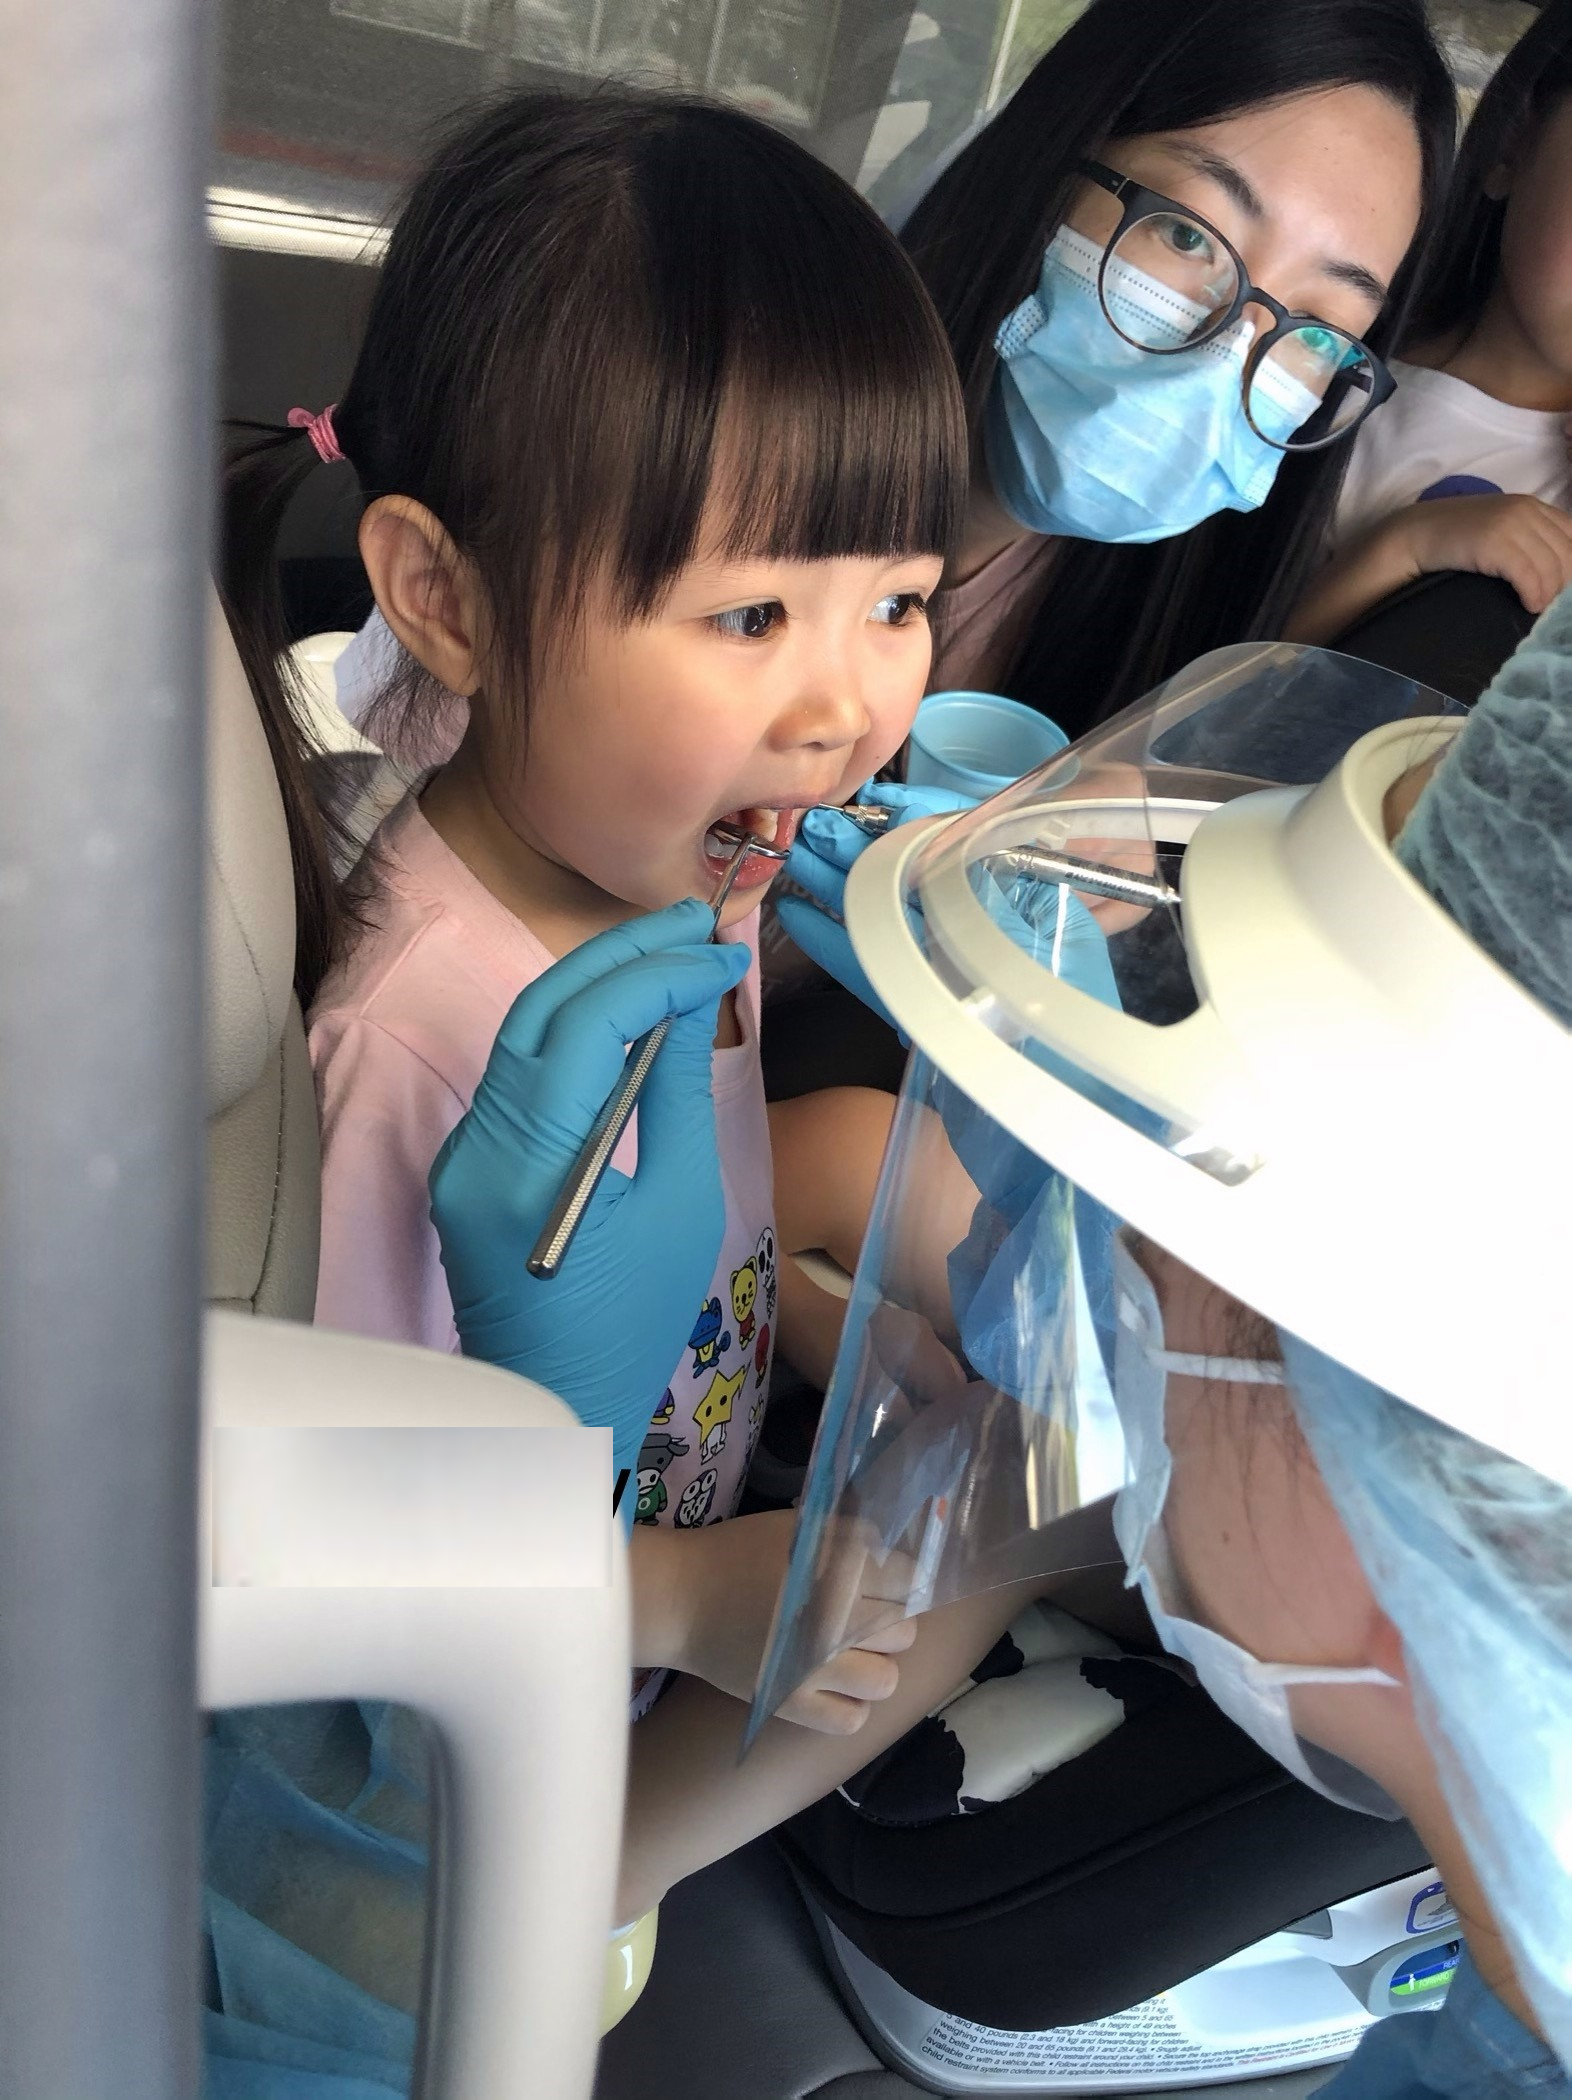 A child receives fluoride varnish application